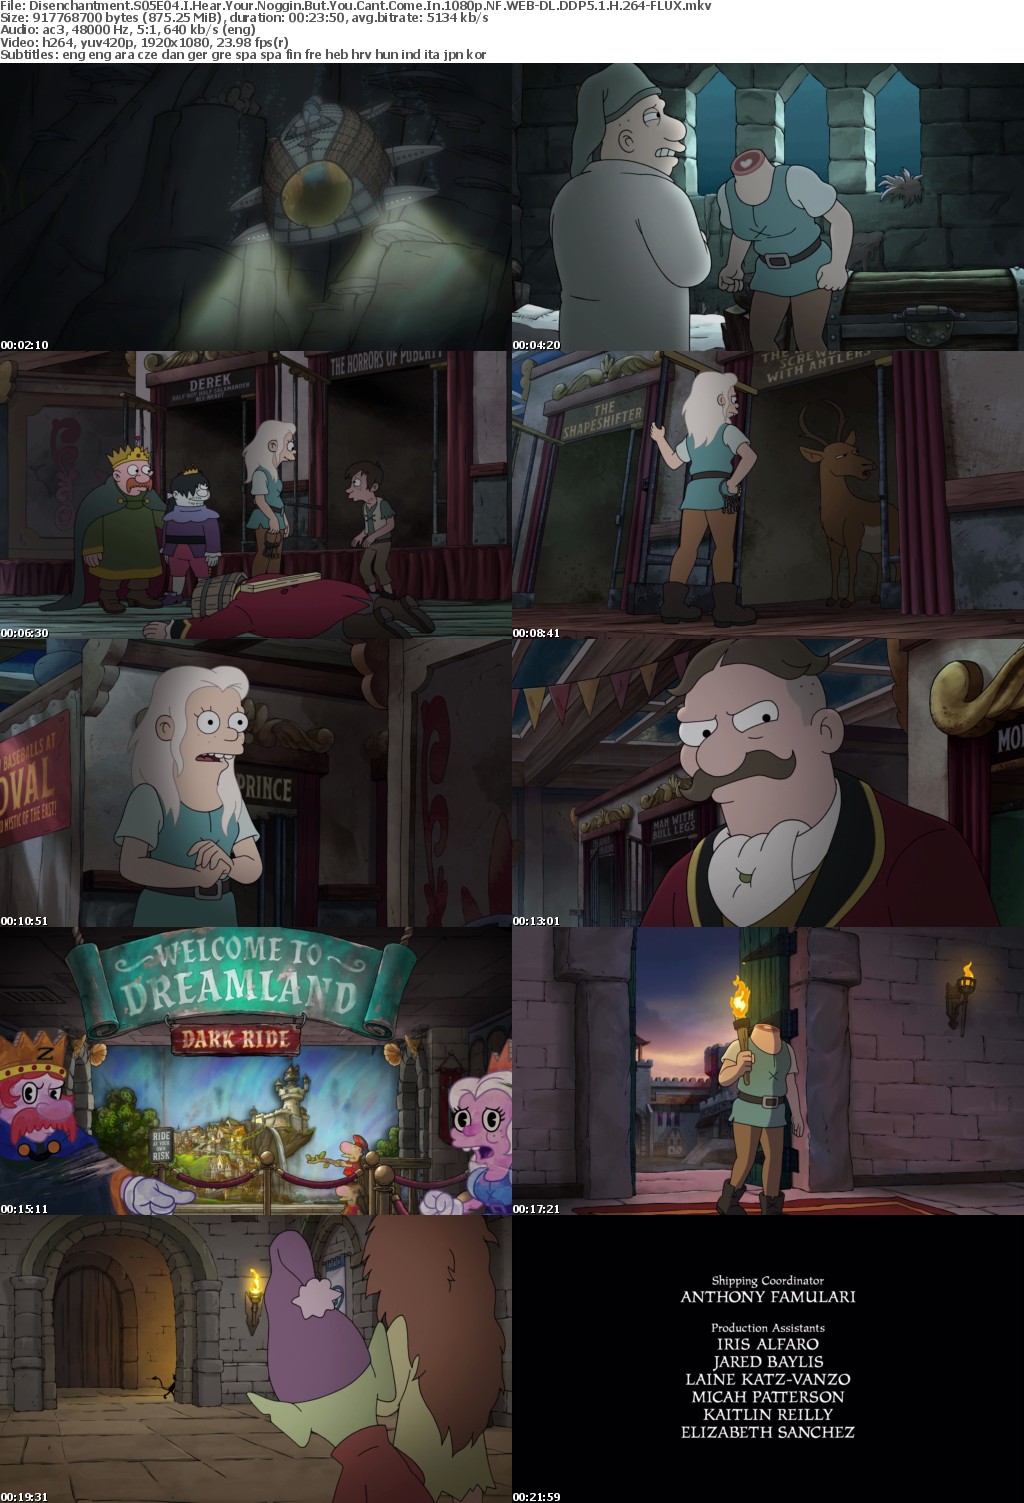 Disenchantment S05E04 I Hear Your Noggin But You Cant Come In 1080p NF WEB-DL DDP5 1 H 264-FLUX